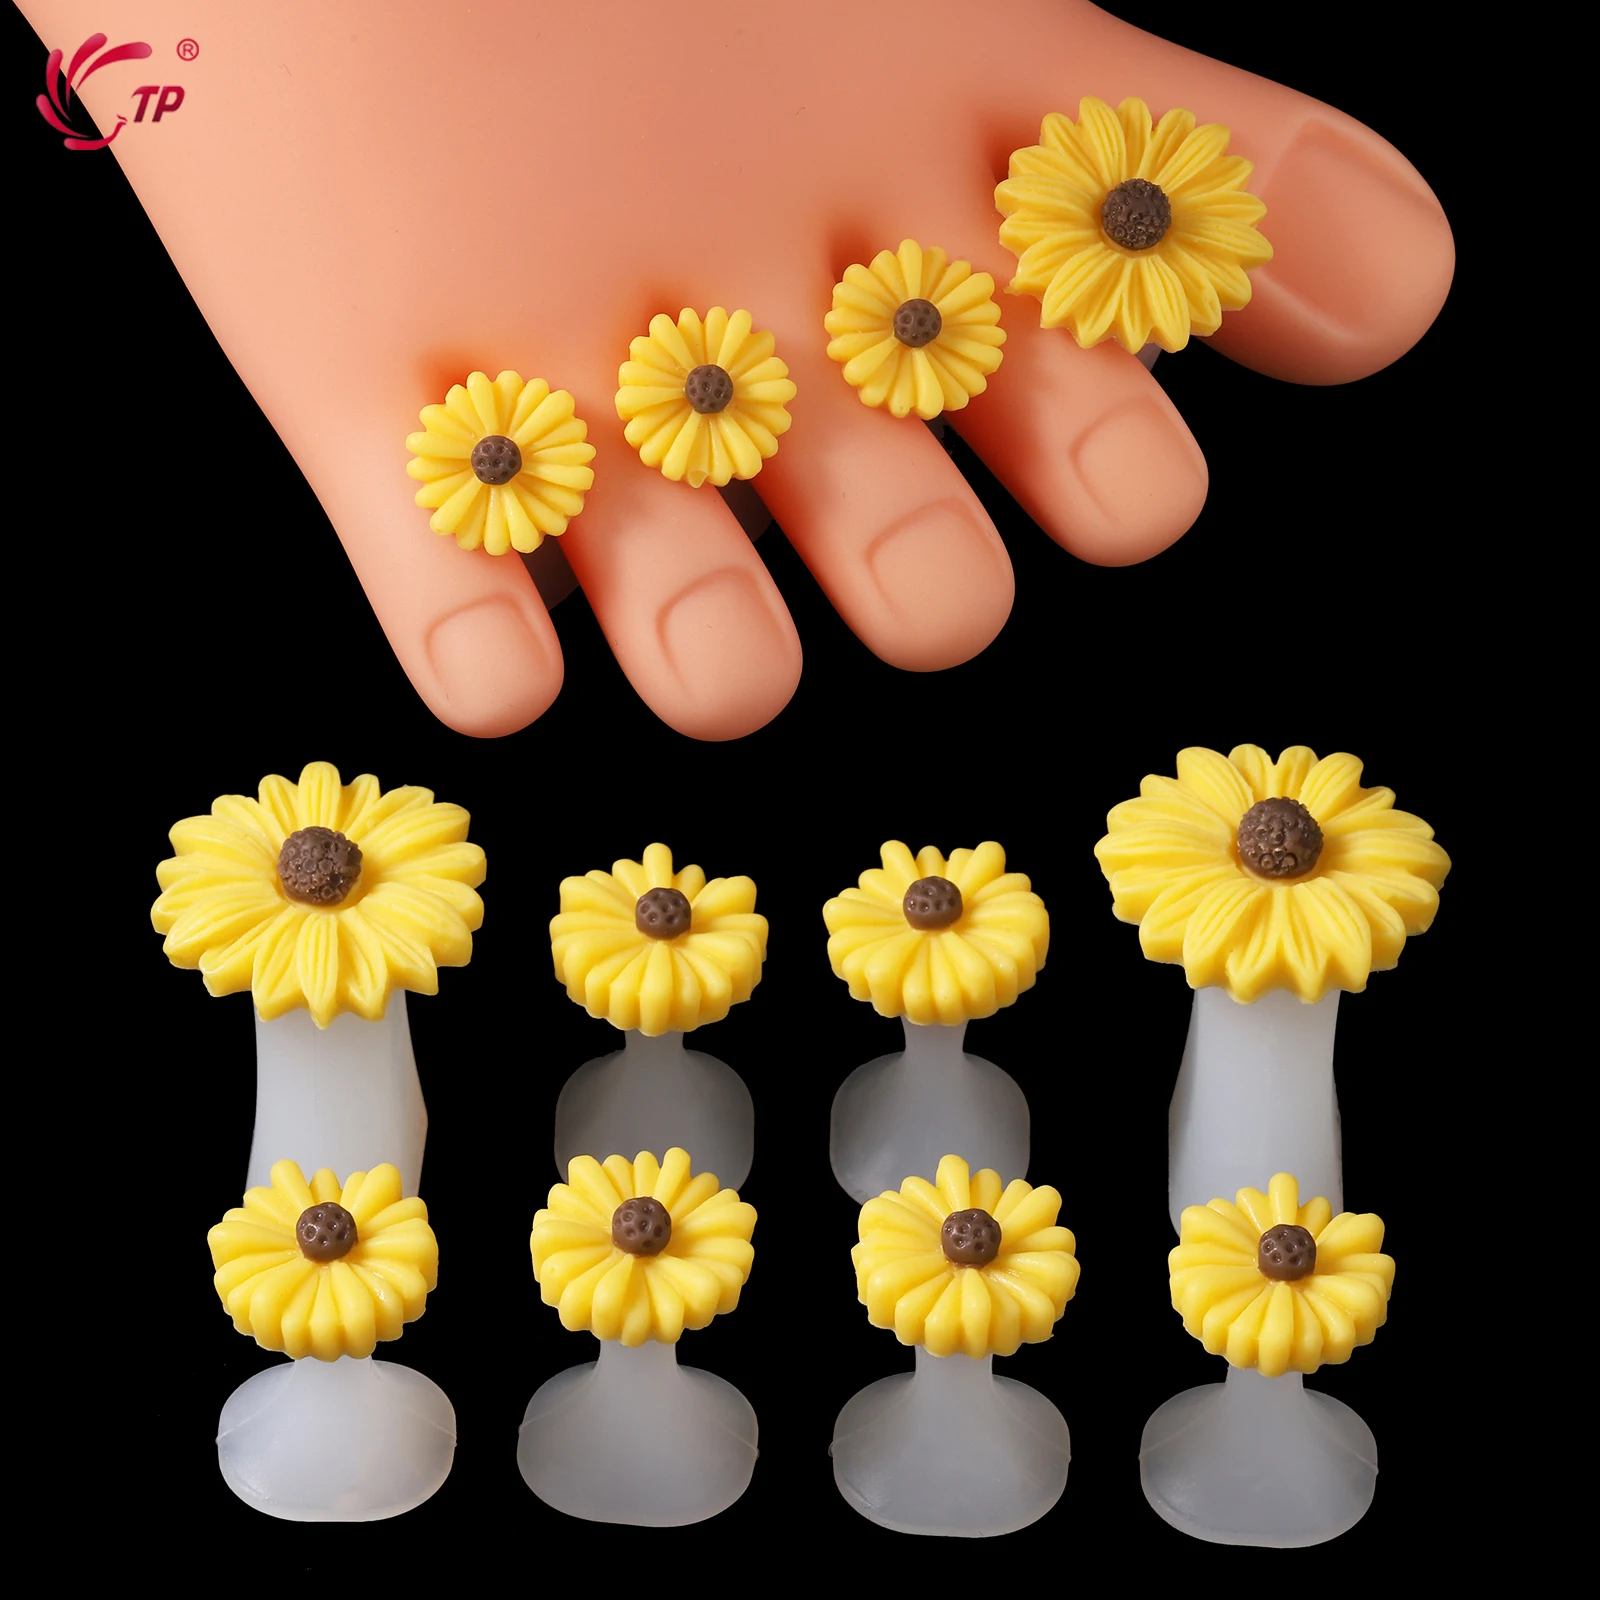 

1Set Pedicure Toe Separators Nail Art Finger Separator Soft Silicone Toe Stretcher Adjuster For Toes Finger Relaxing Holding